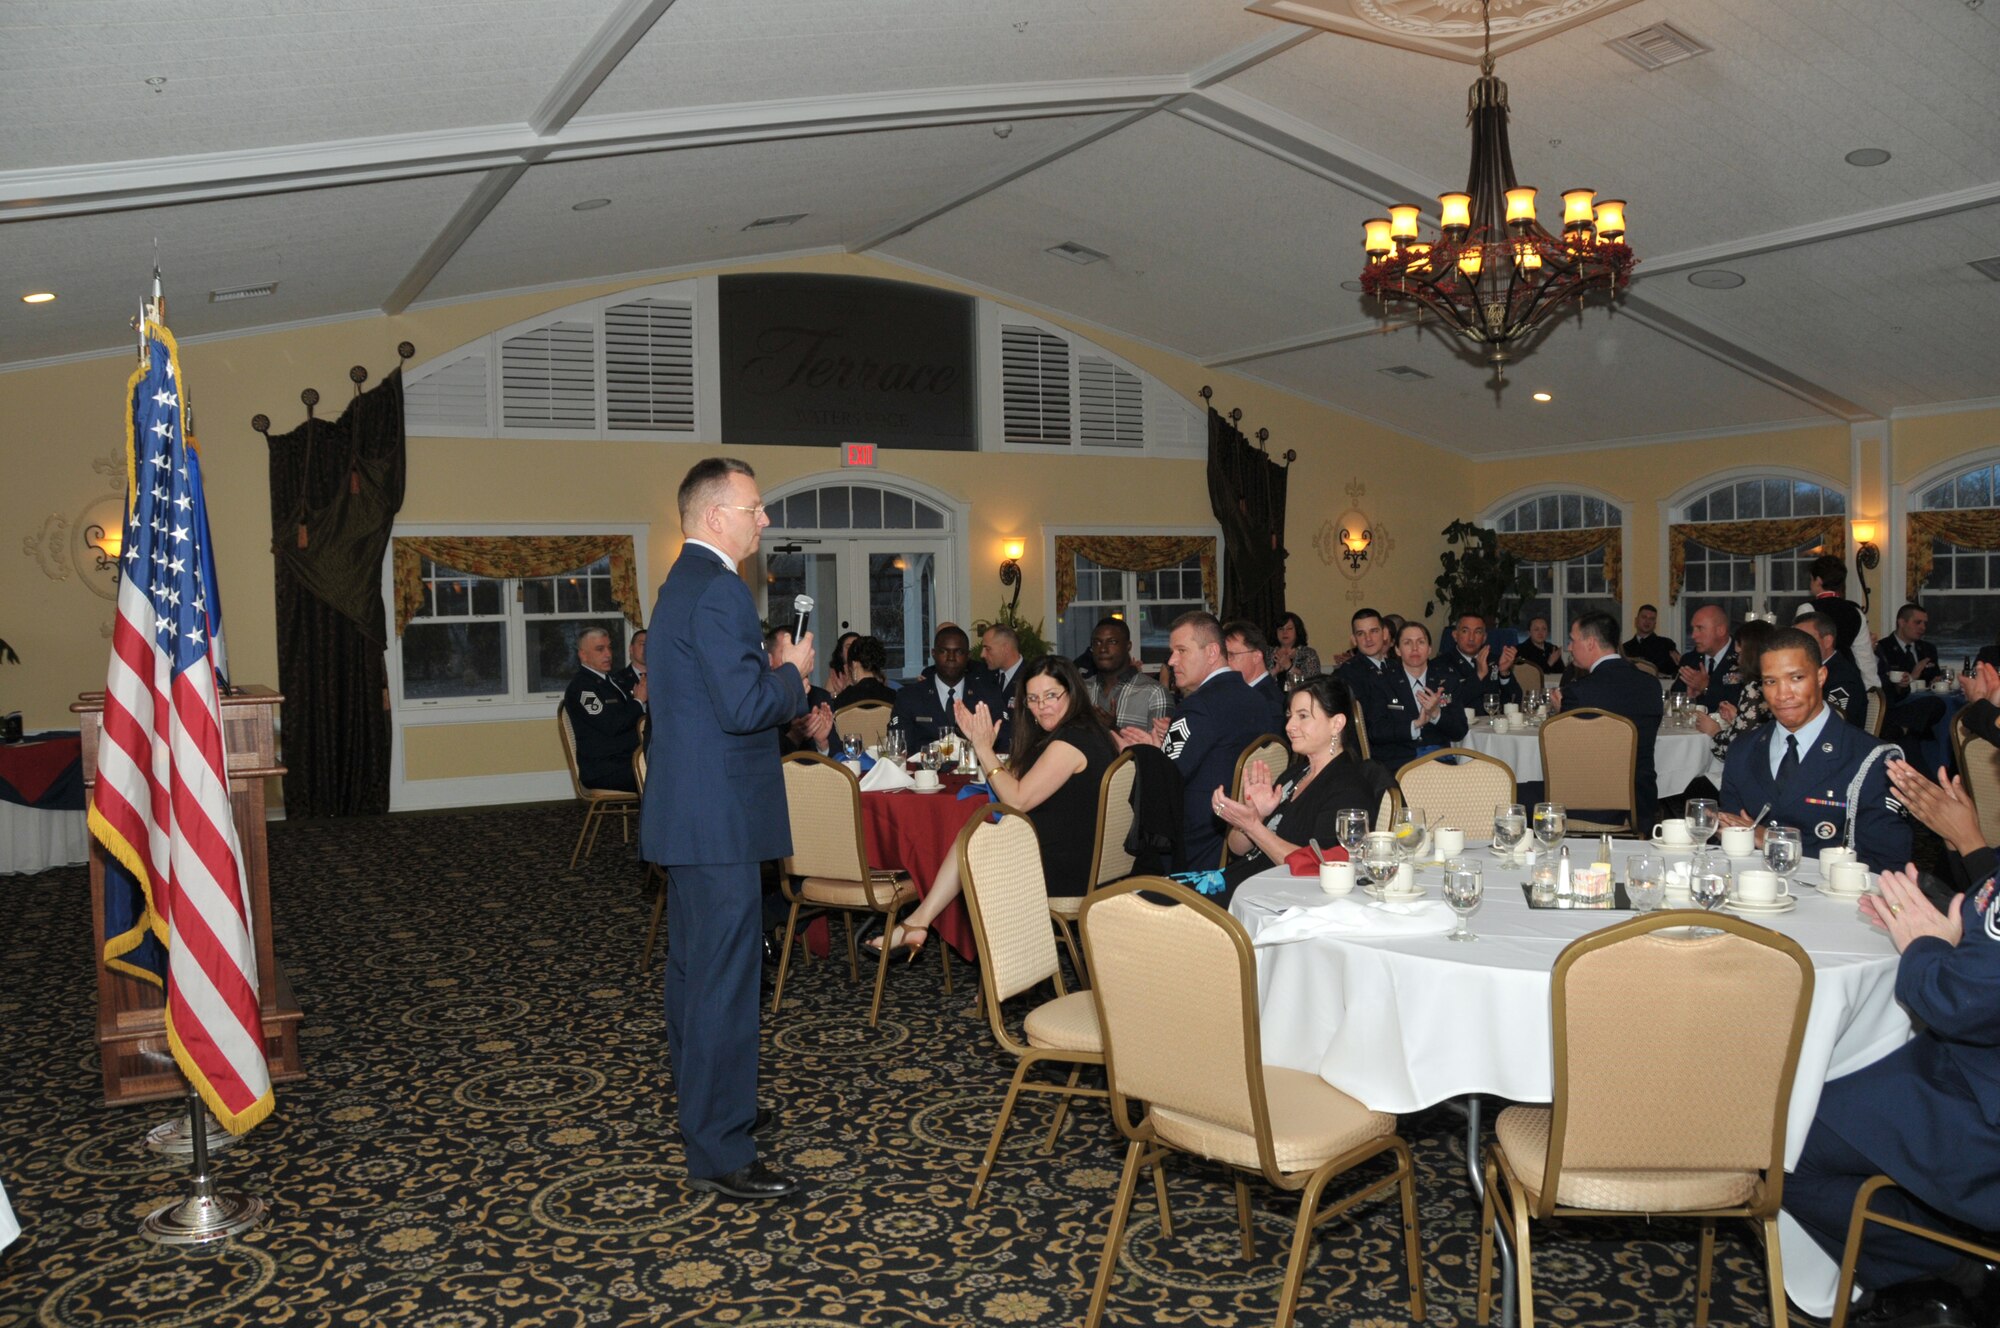 SCOTIA, N.Y. -- Brig. Gen. Anthony German, New York Chief of Staff-Air, was the guest speaker at the 109th Airlift Wing's annual Airmen of the Year Dinner on April 4. About 75 attendees were there to honor Senior Master Sgt. Patrick FitzGerald, Senior NCO of the Year, Master Sgt. Amanda Blodgett, First Sergeant of the Year, Tech. Sgt. Robert Harrington, NCO of the Year, and Senior Airman Kylief Tucker, Airman of the Year. (Air National Guard photo by Master Sgt. William Gizara/Released)